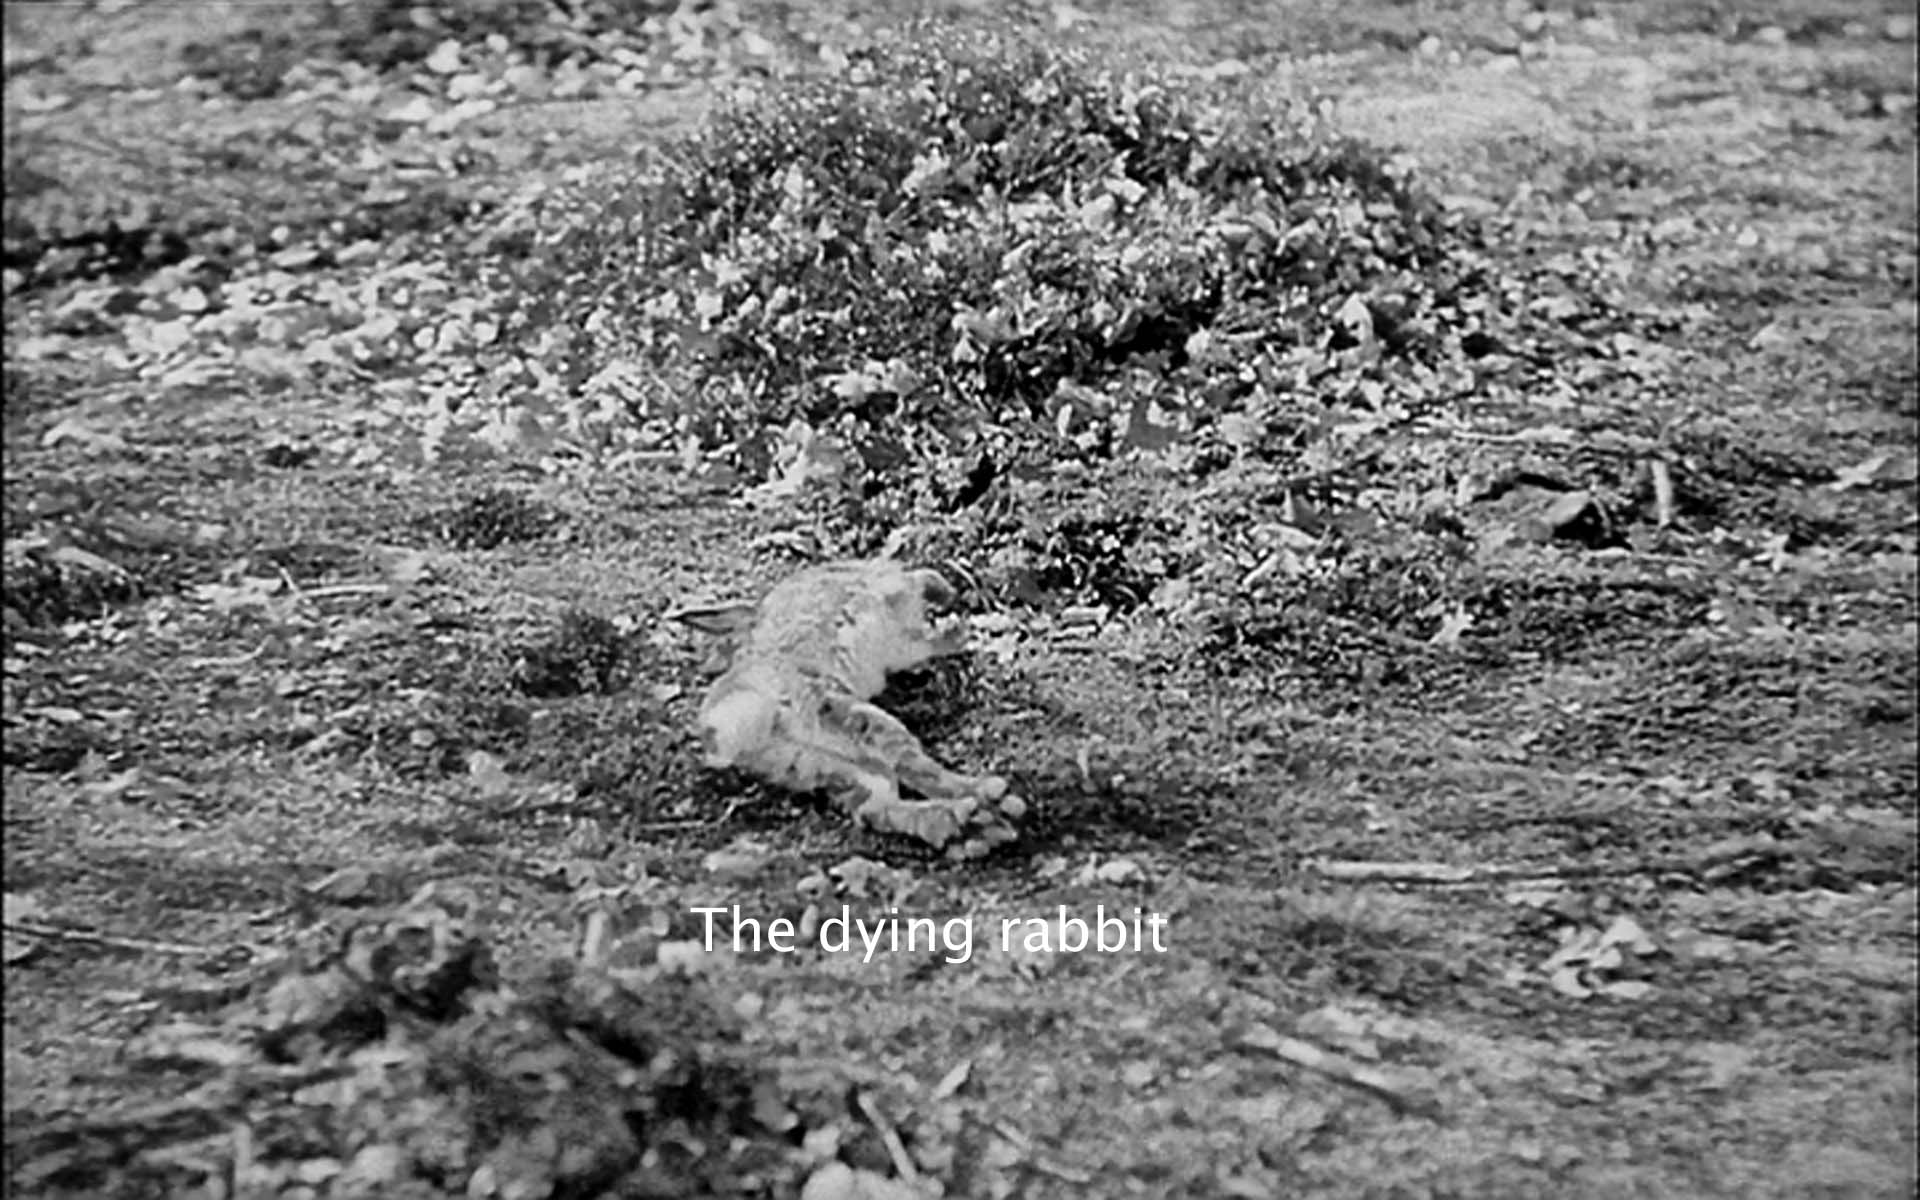 The dying rabbit